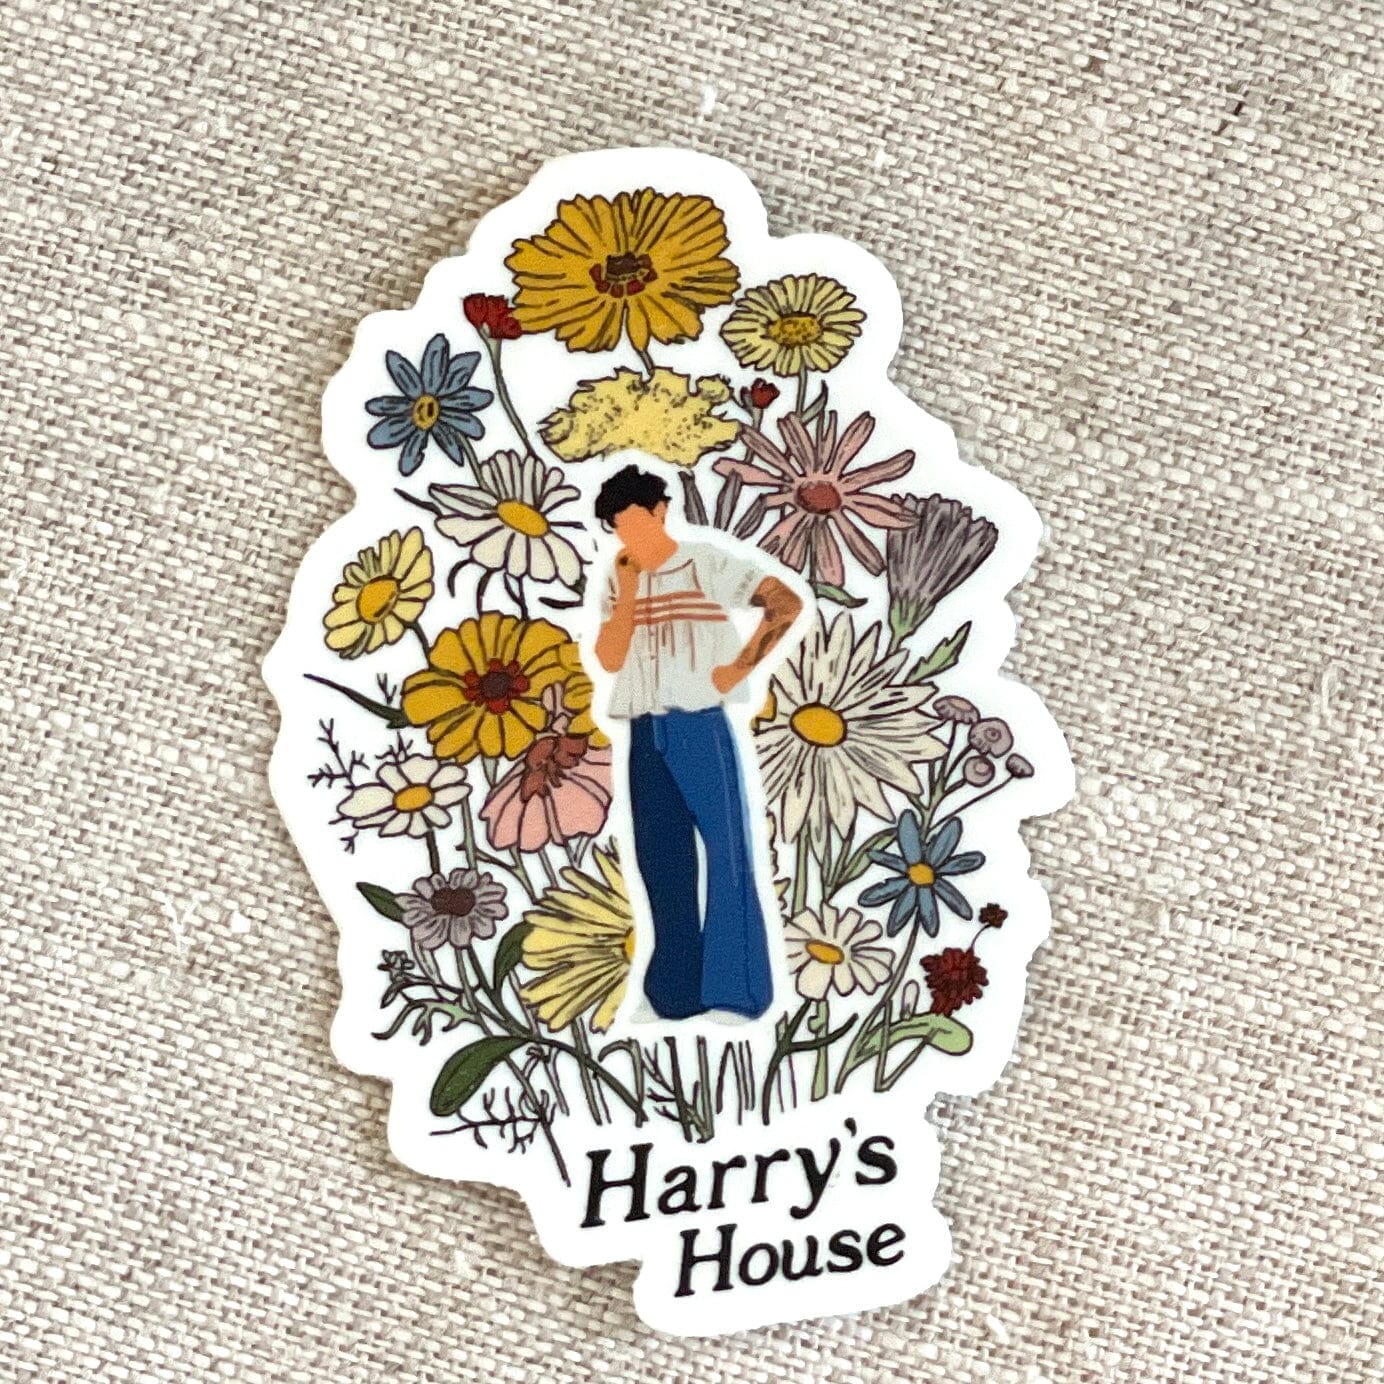 Harry's House Inviting Affairs Paperie Sticker - PORCH